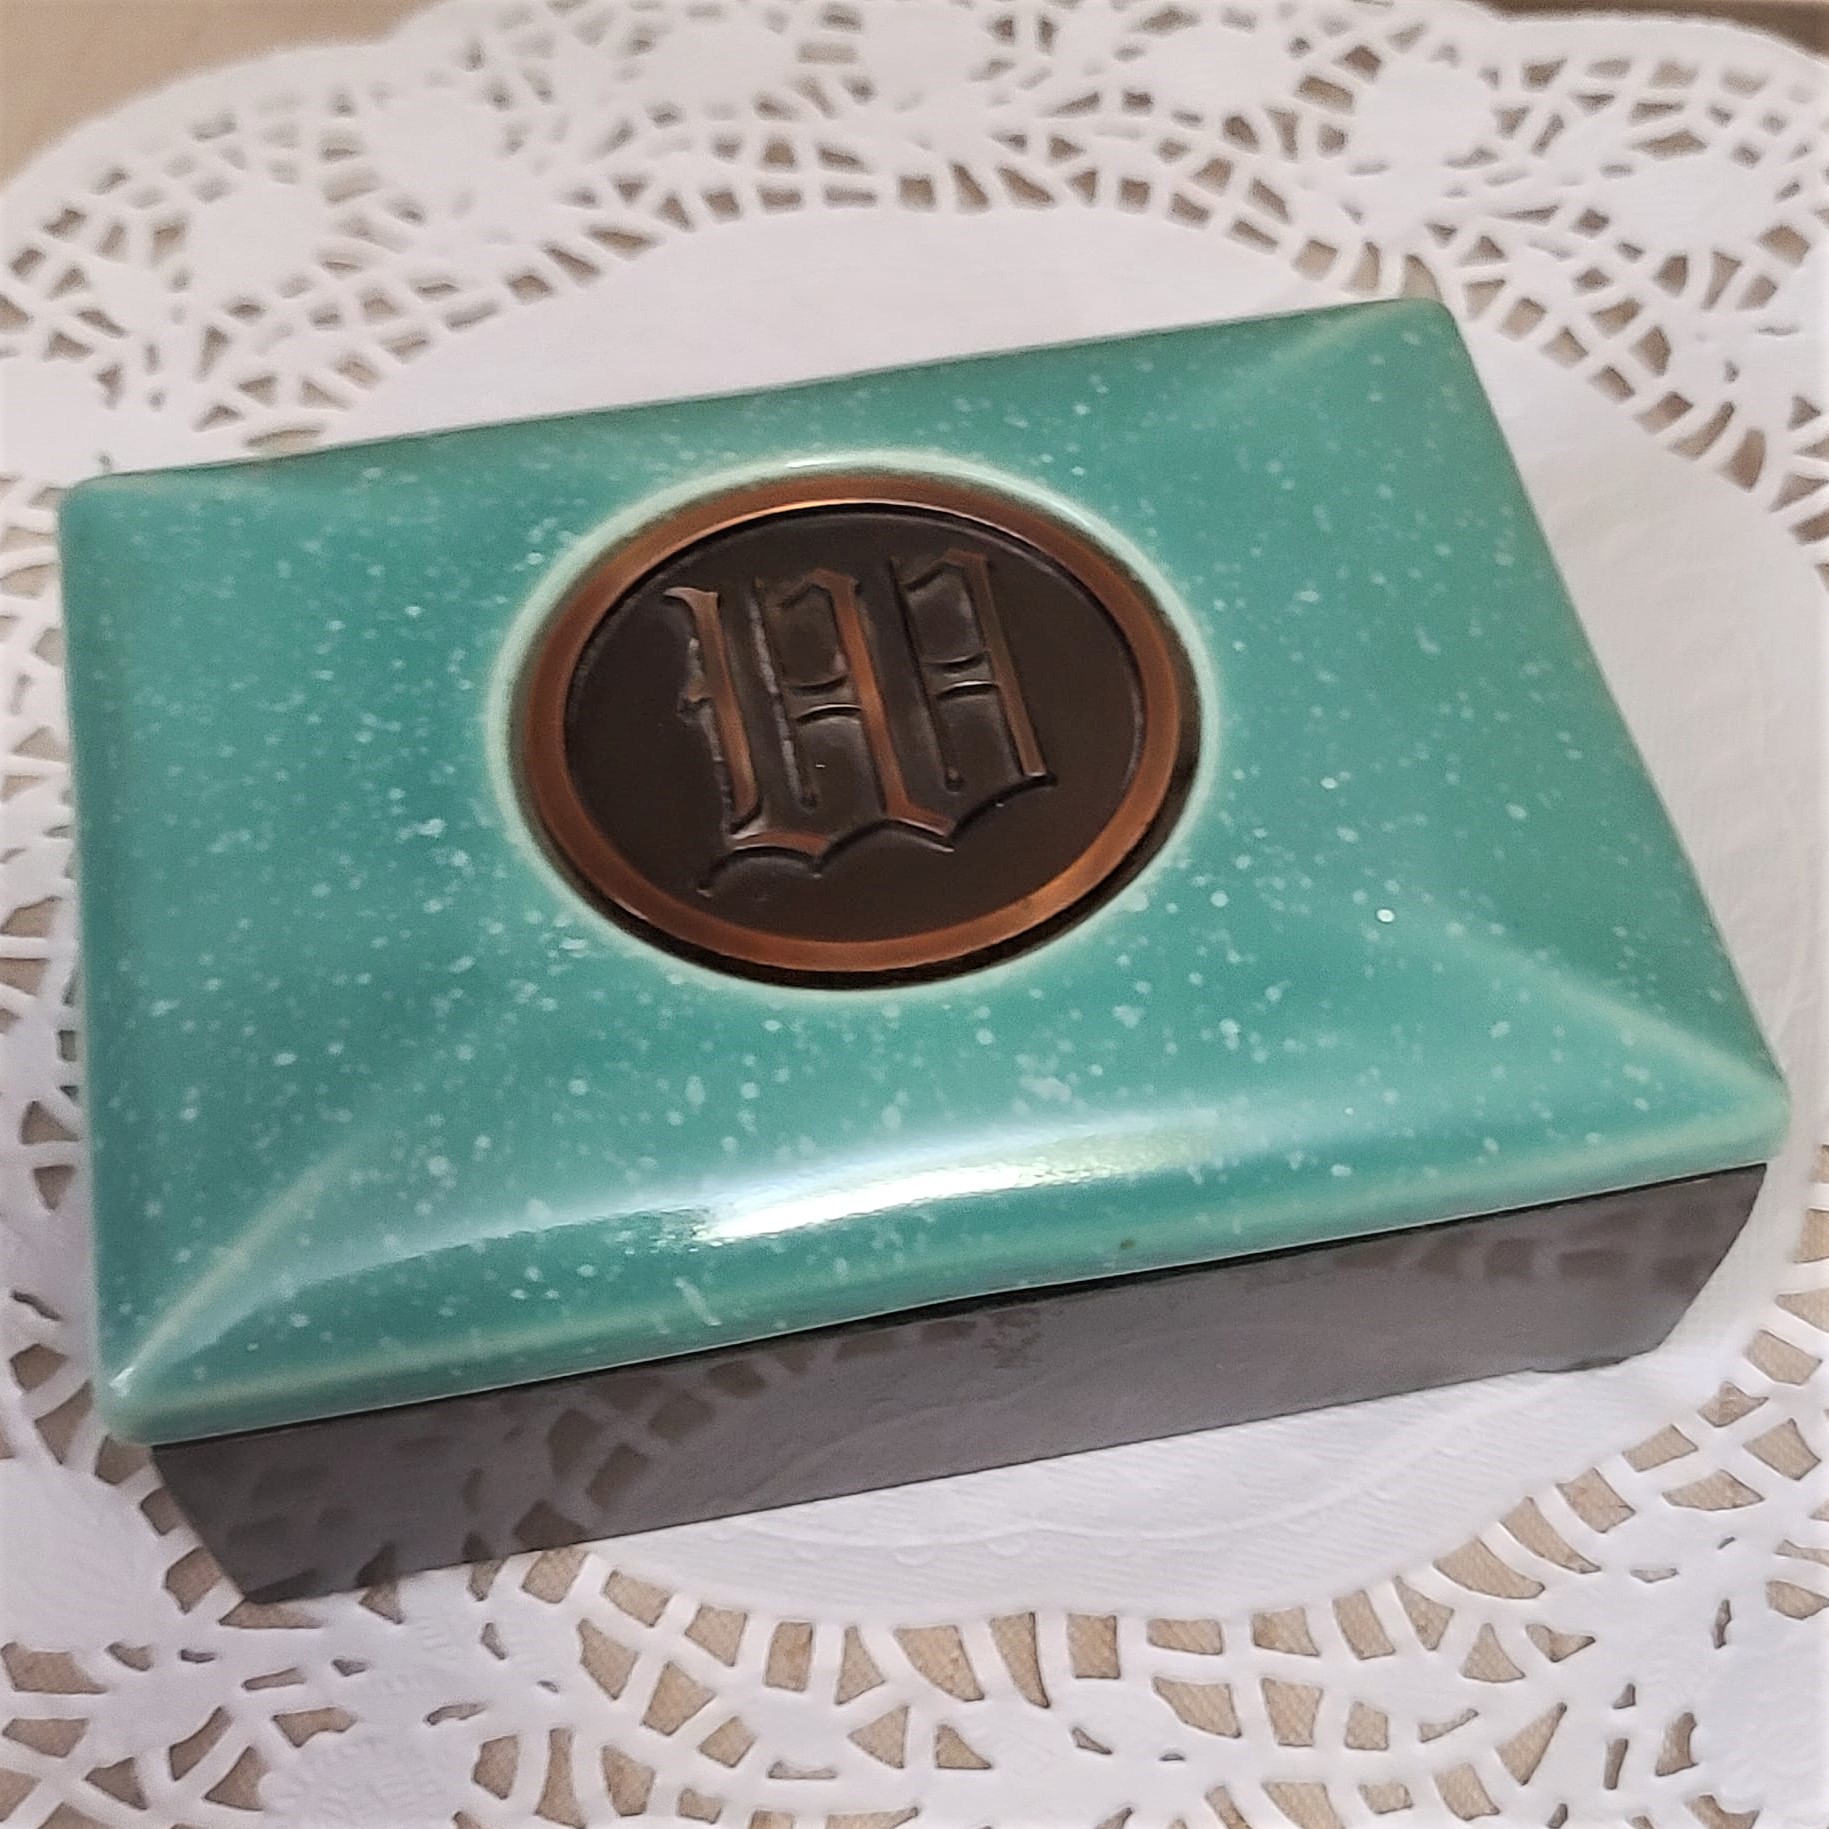 Roseville Hyde Park Speckled Pottery 1950's Jewelry Box